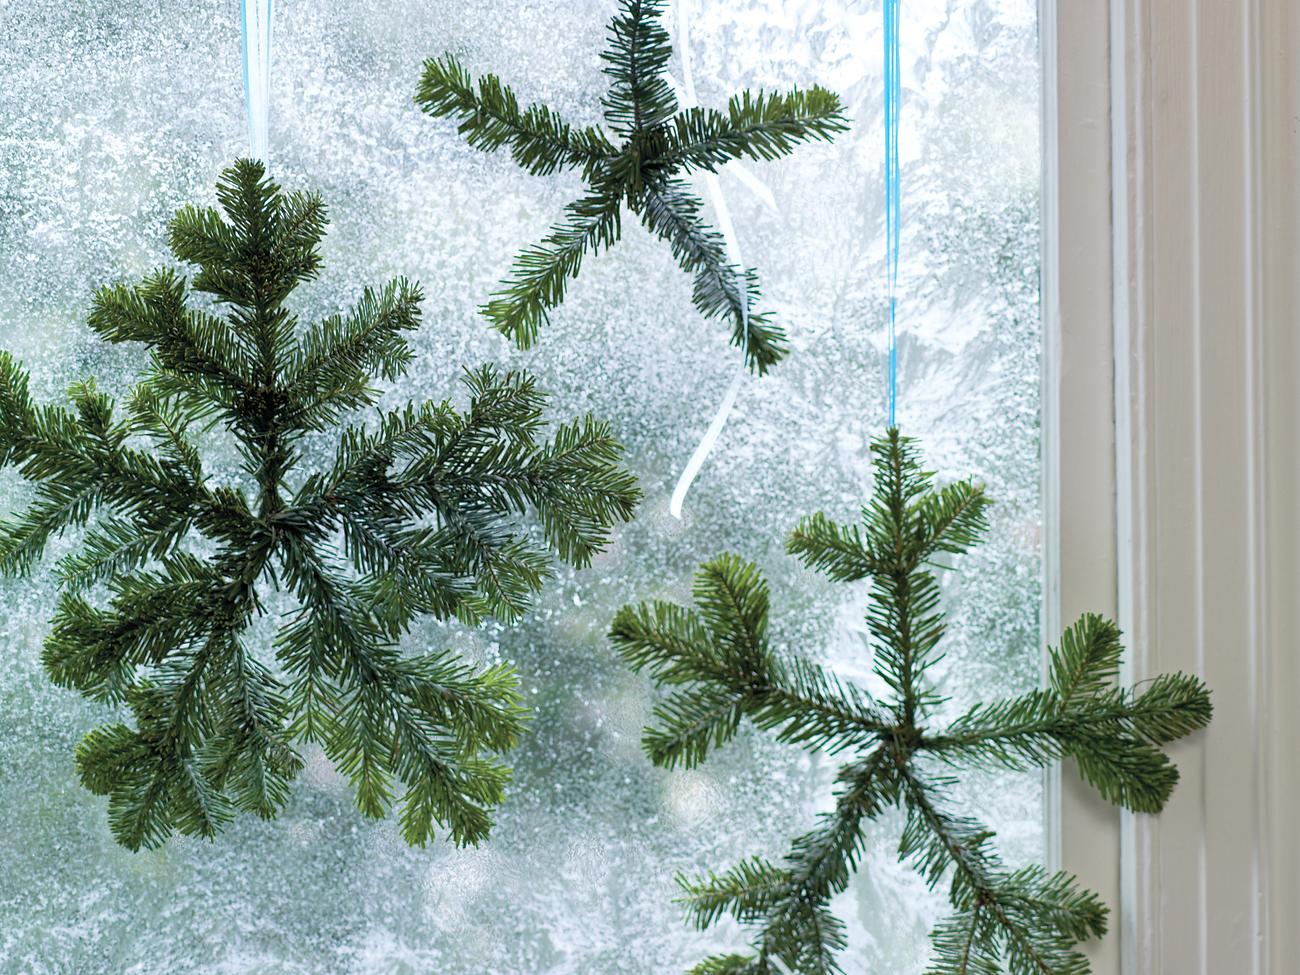 Decorate with winter greens